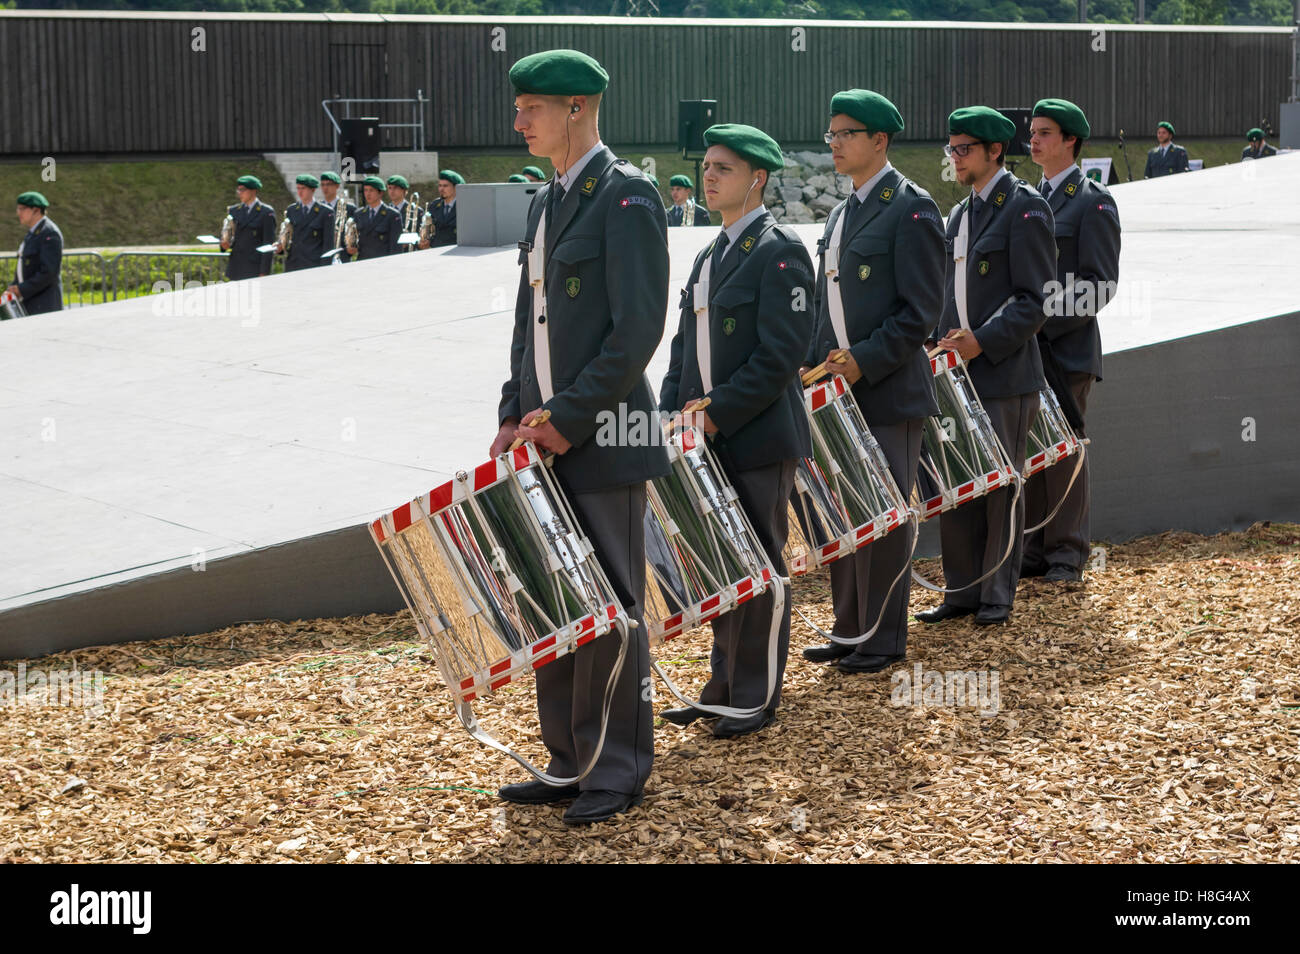 Drummers of the Swiss Army giving a martial music performance on a sunny day. Stock Photo